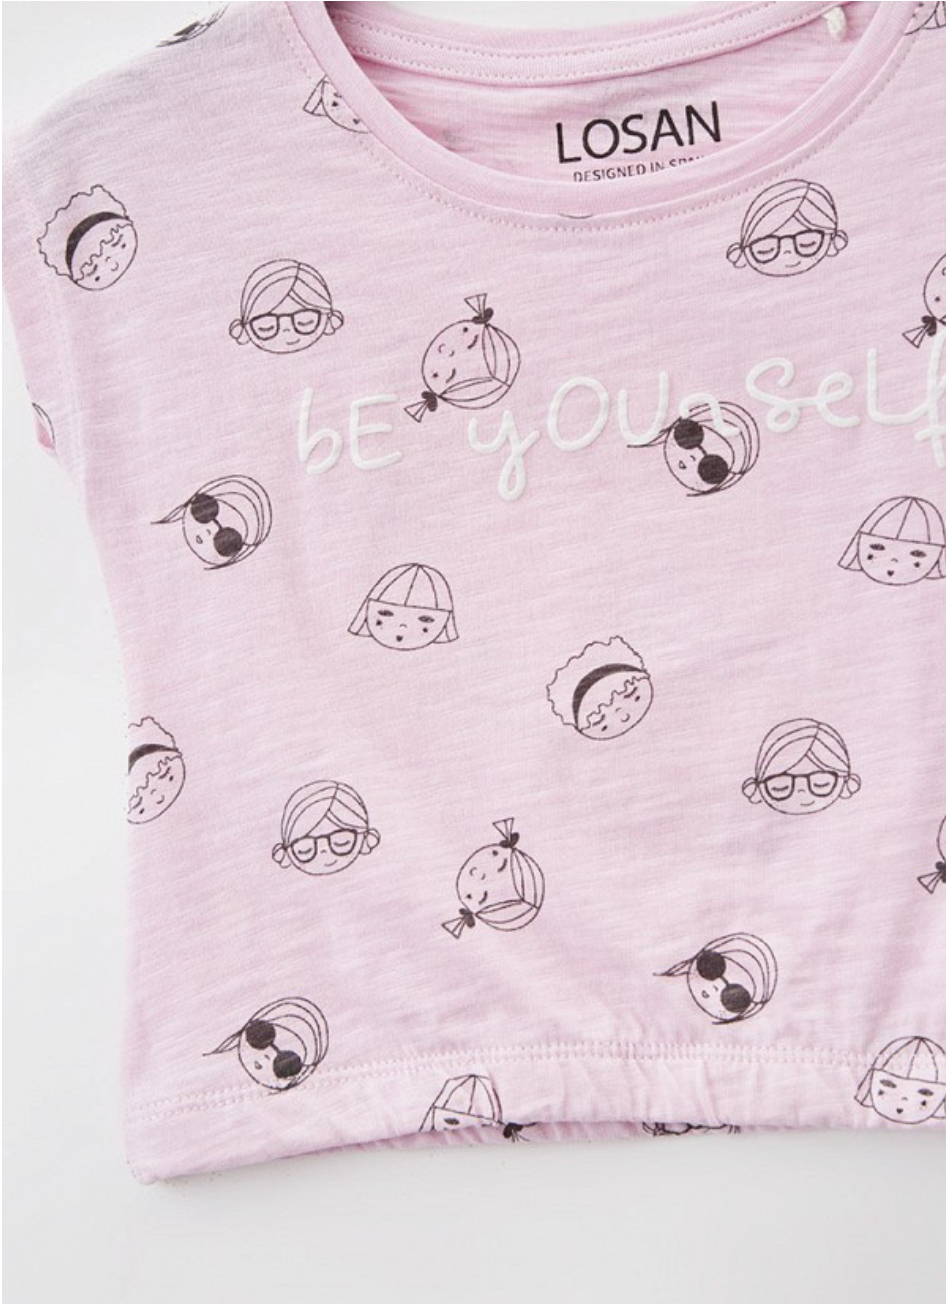 Be Yourself Pink Short Sleeve T-Shirt, Child